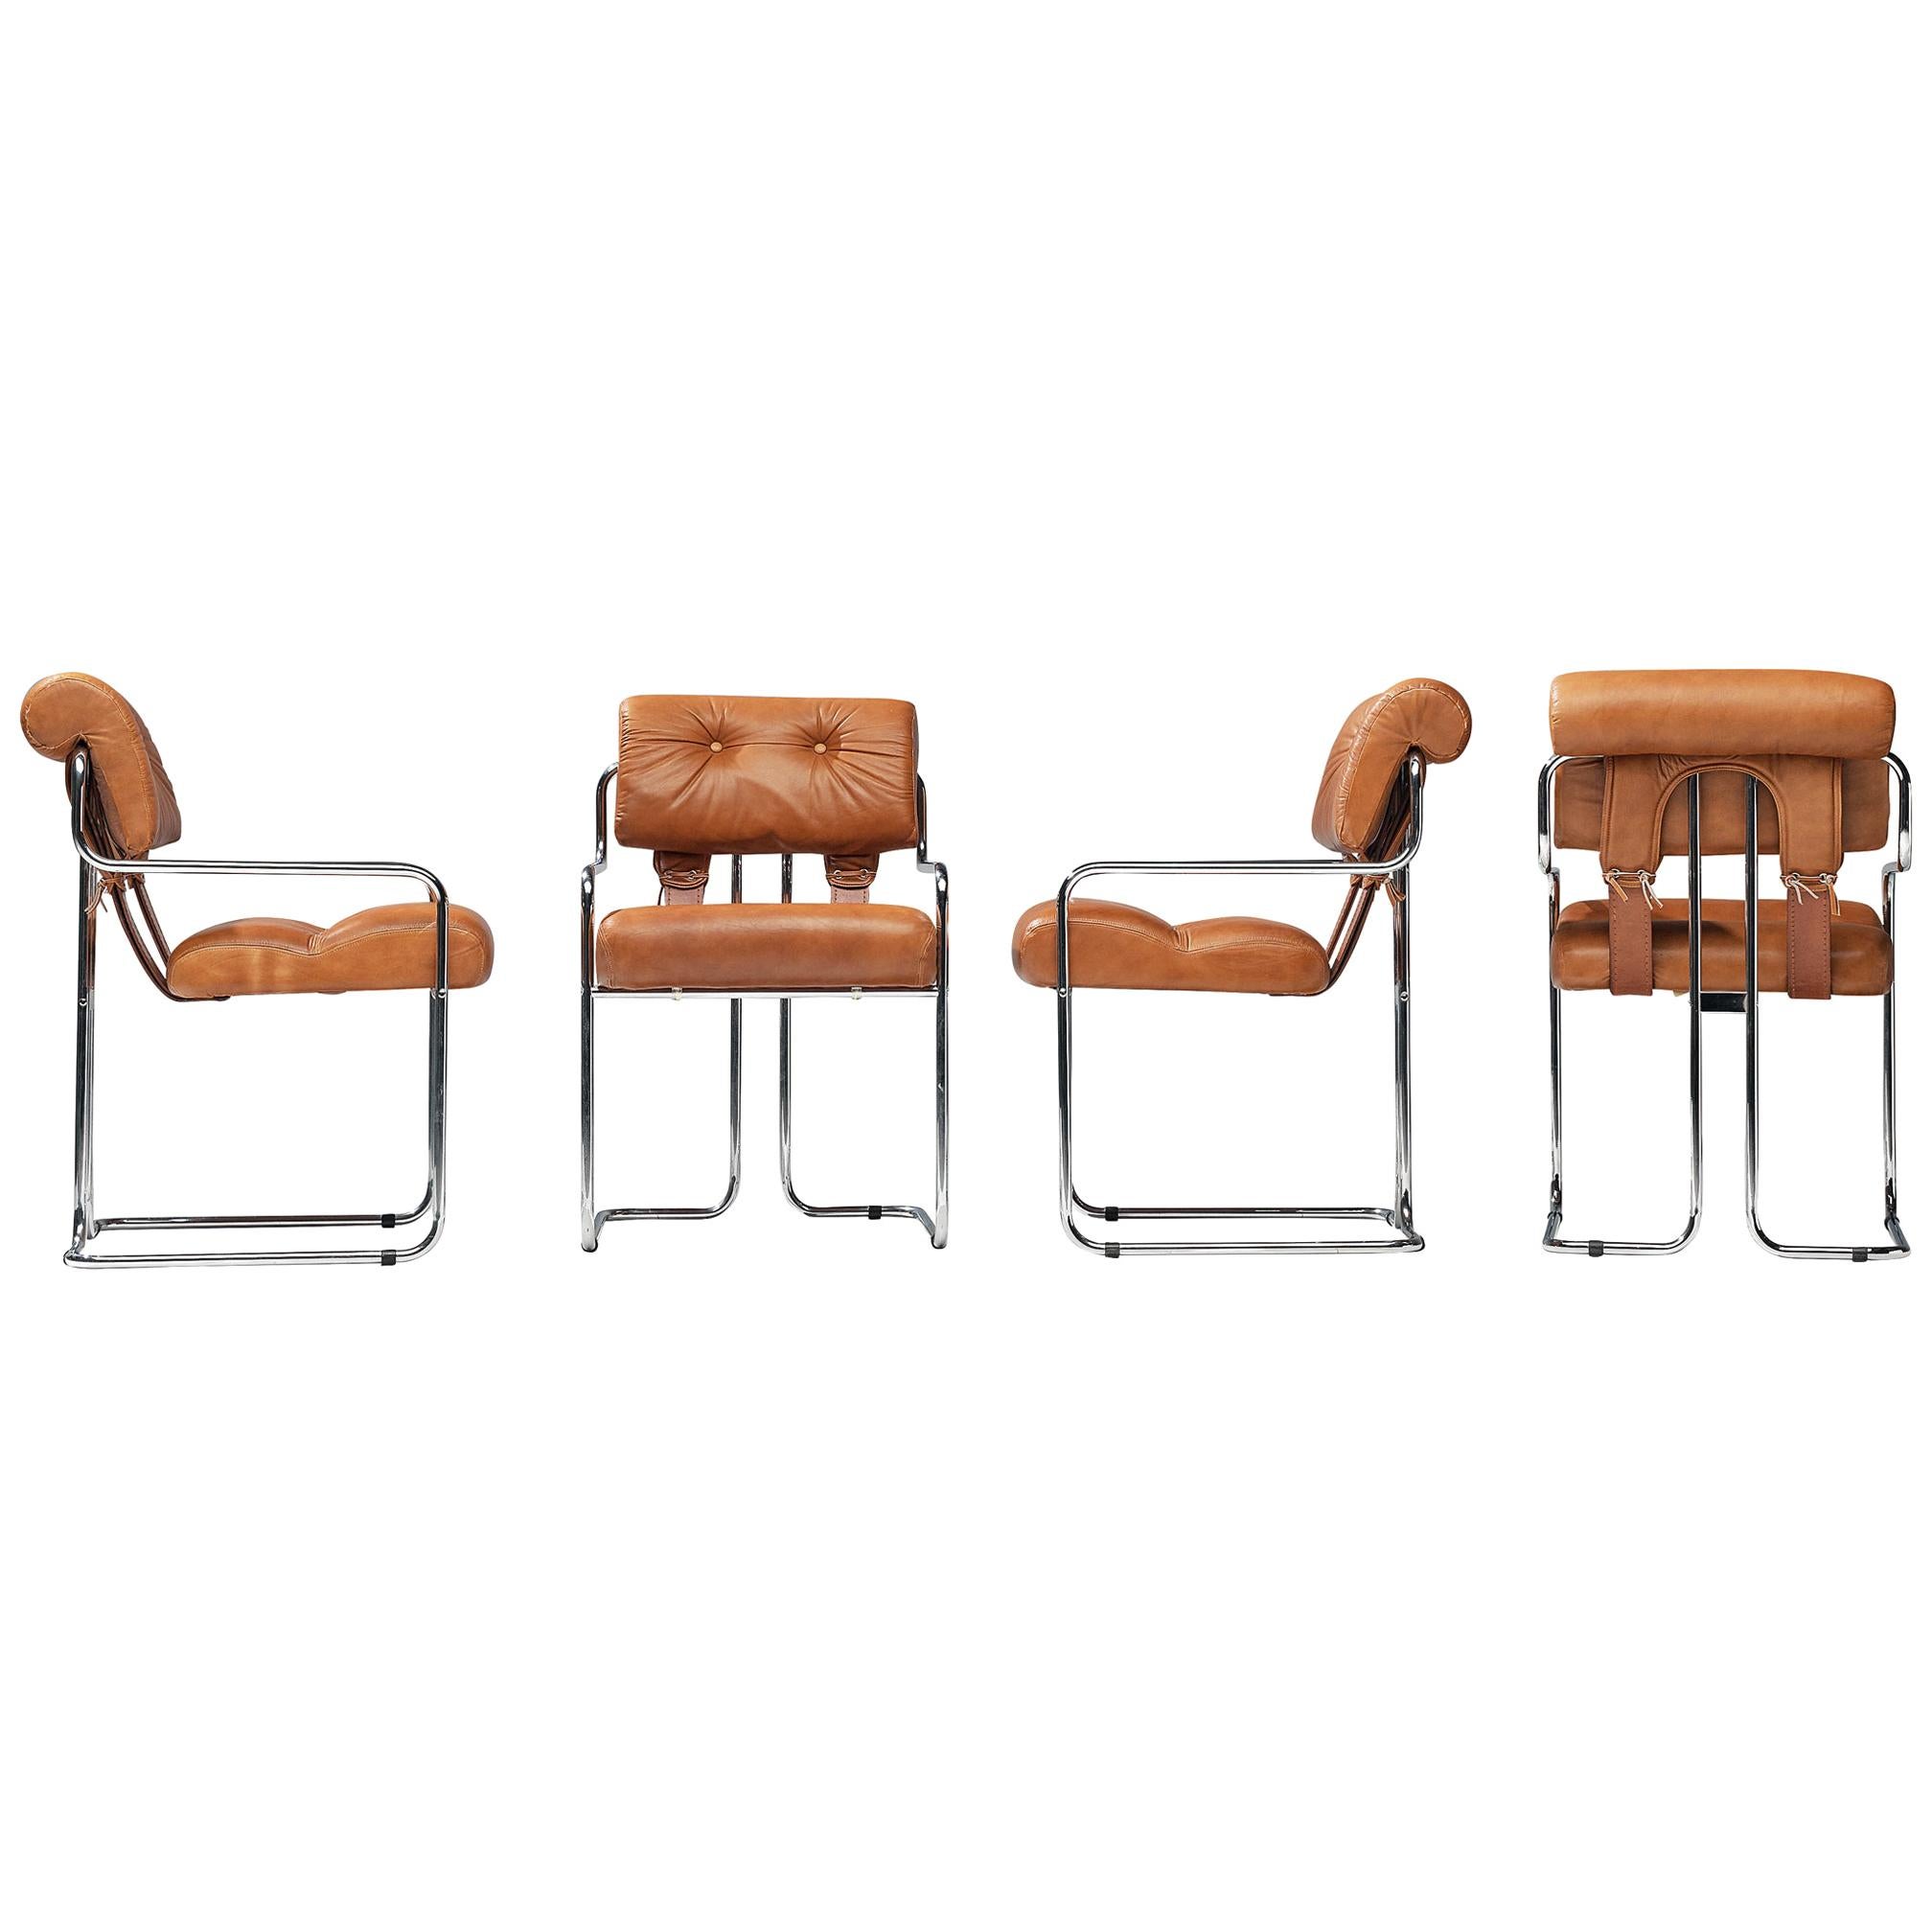 Guido Faleschini 'Tucroma' Chairs in Cognac Leather